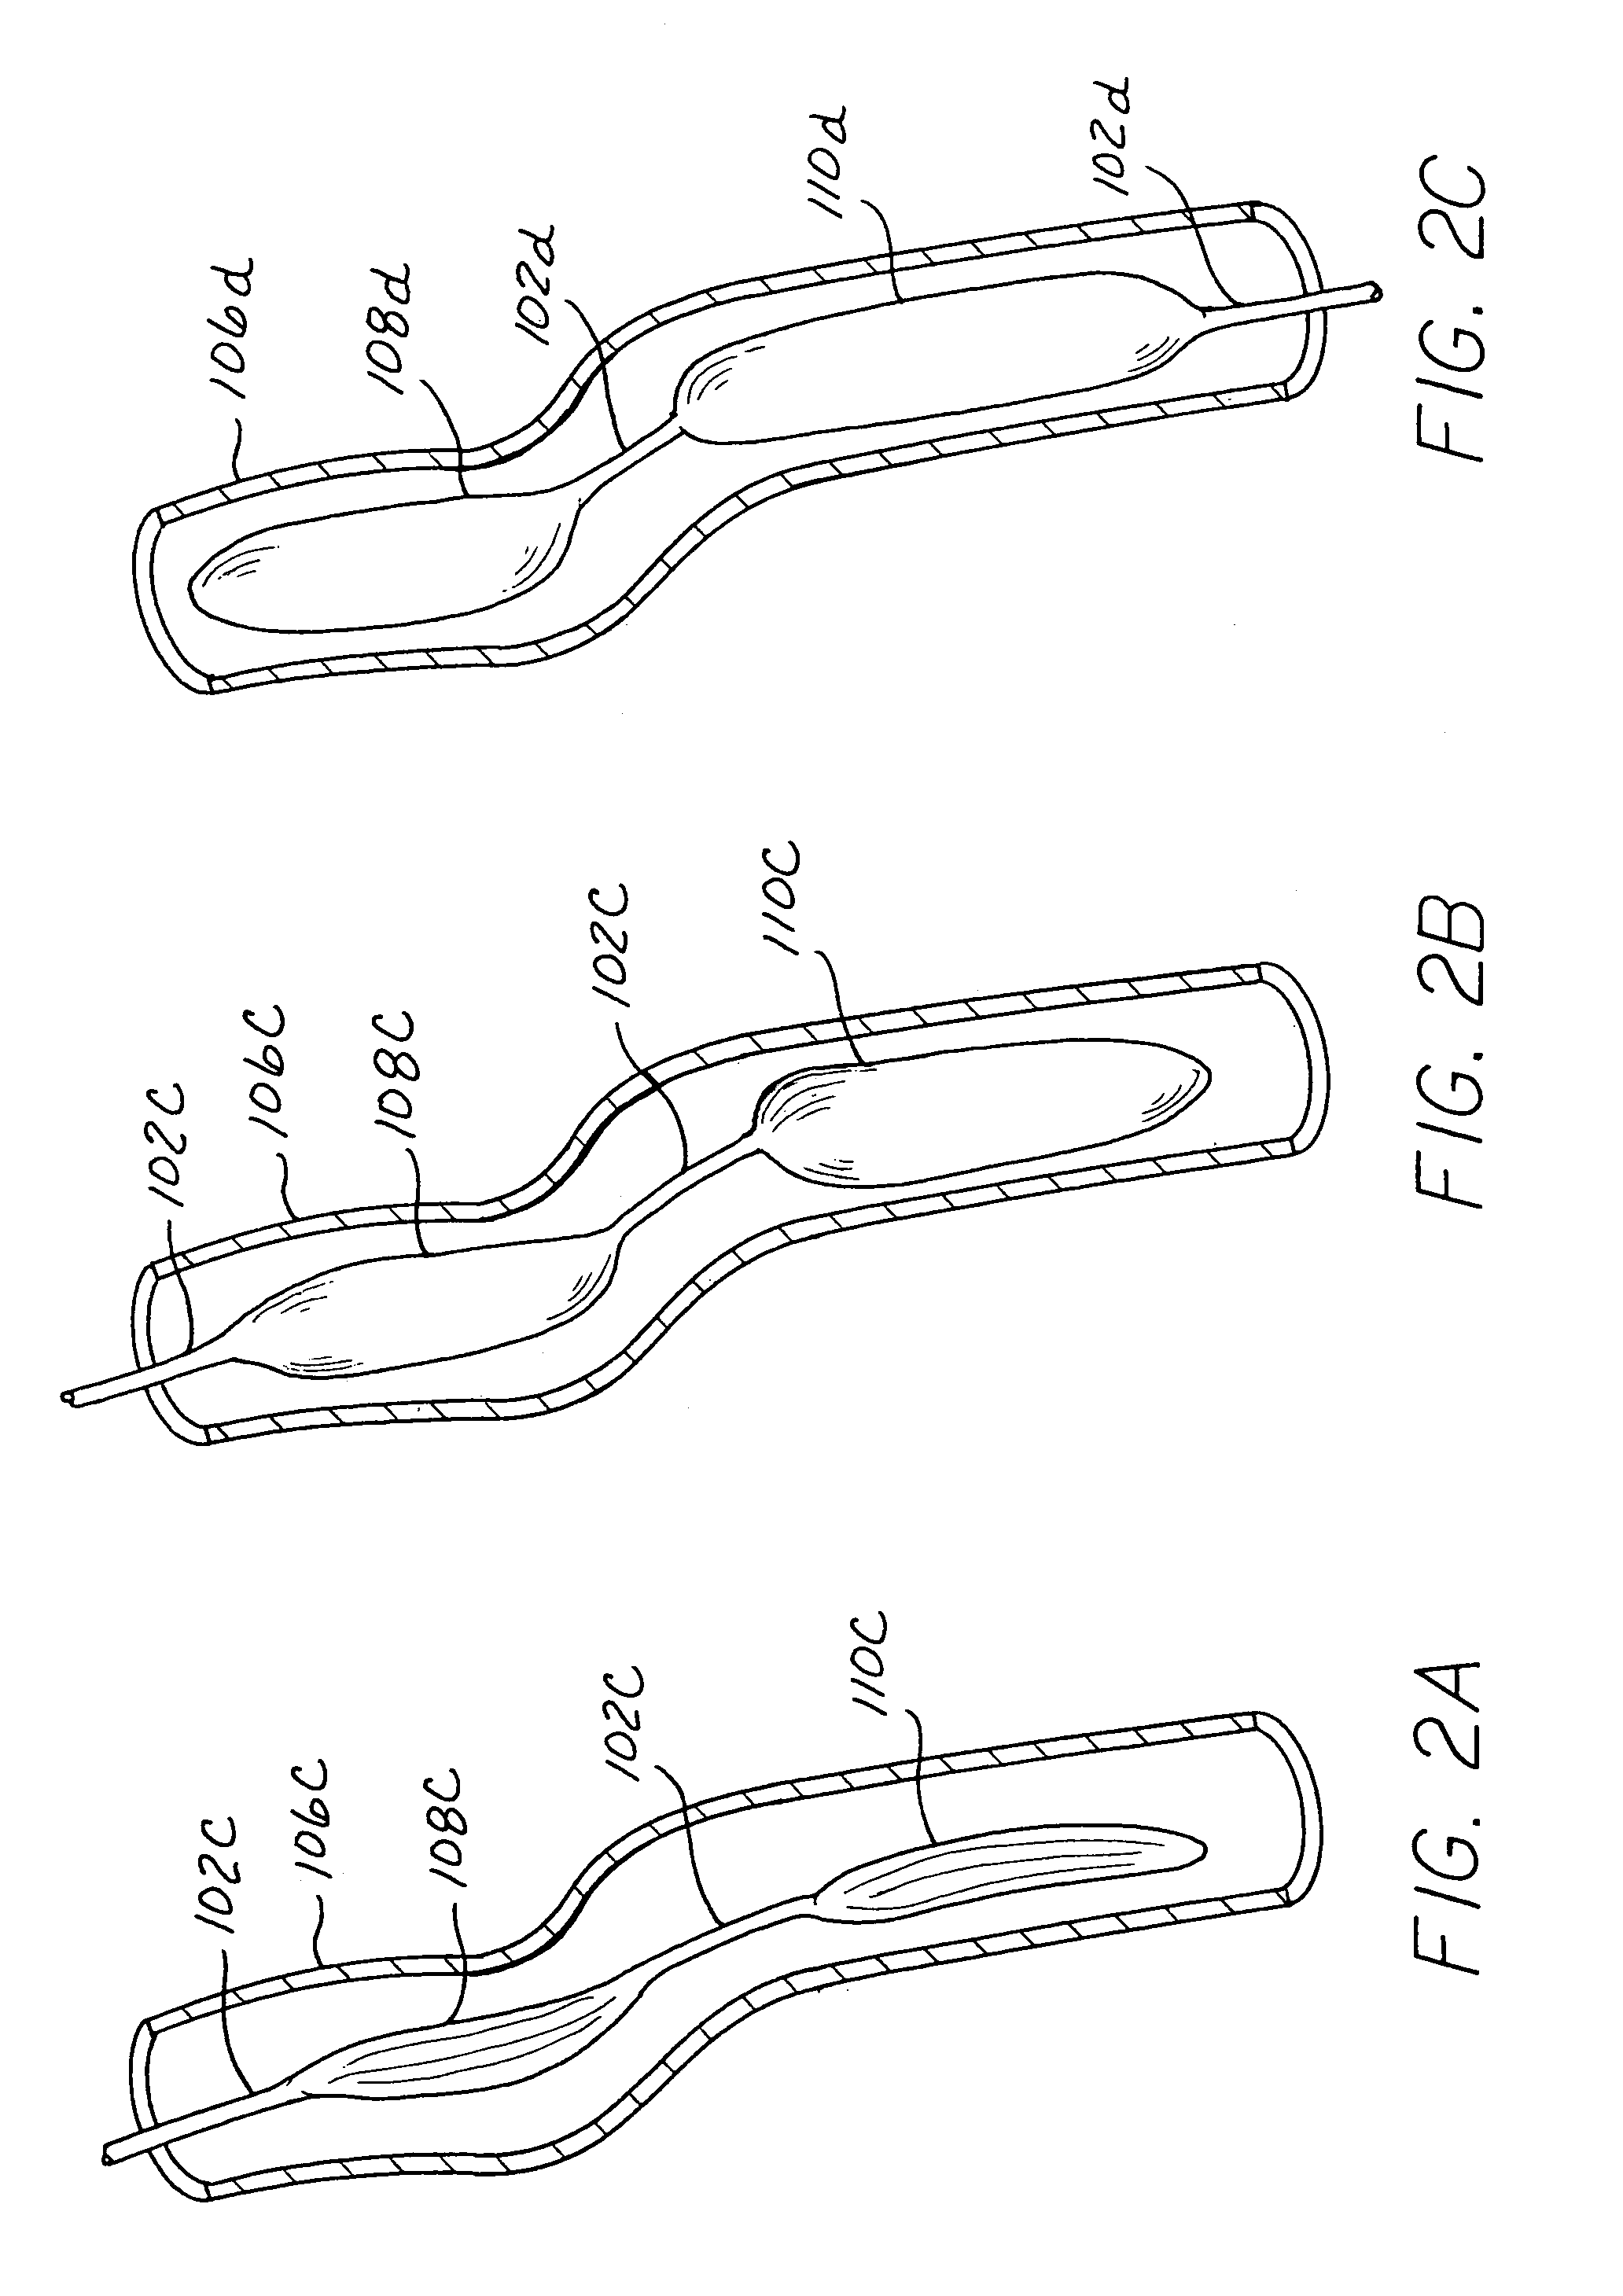 Long term ambulatory intra-aortic balloon pump with three dimensional tortuous shape